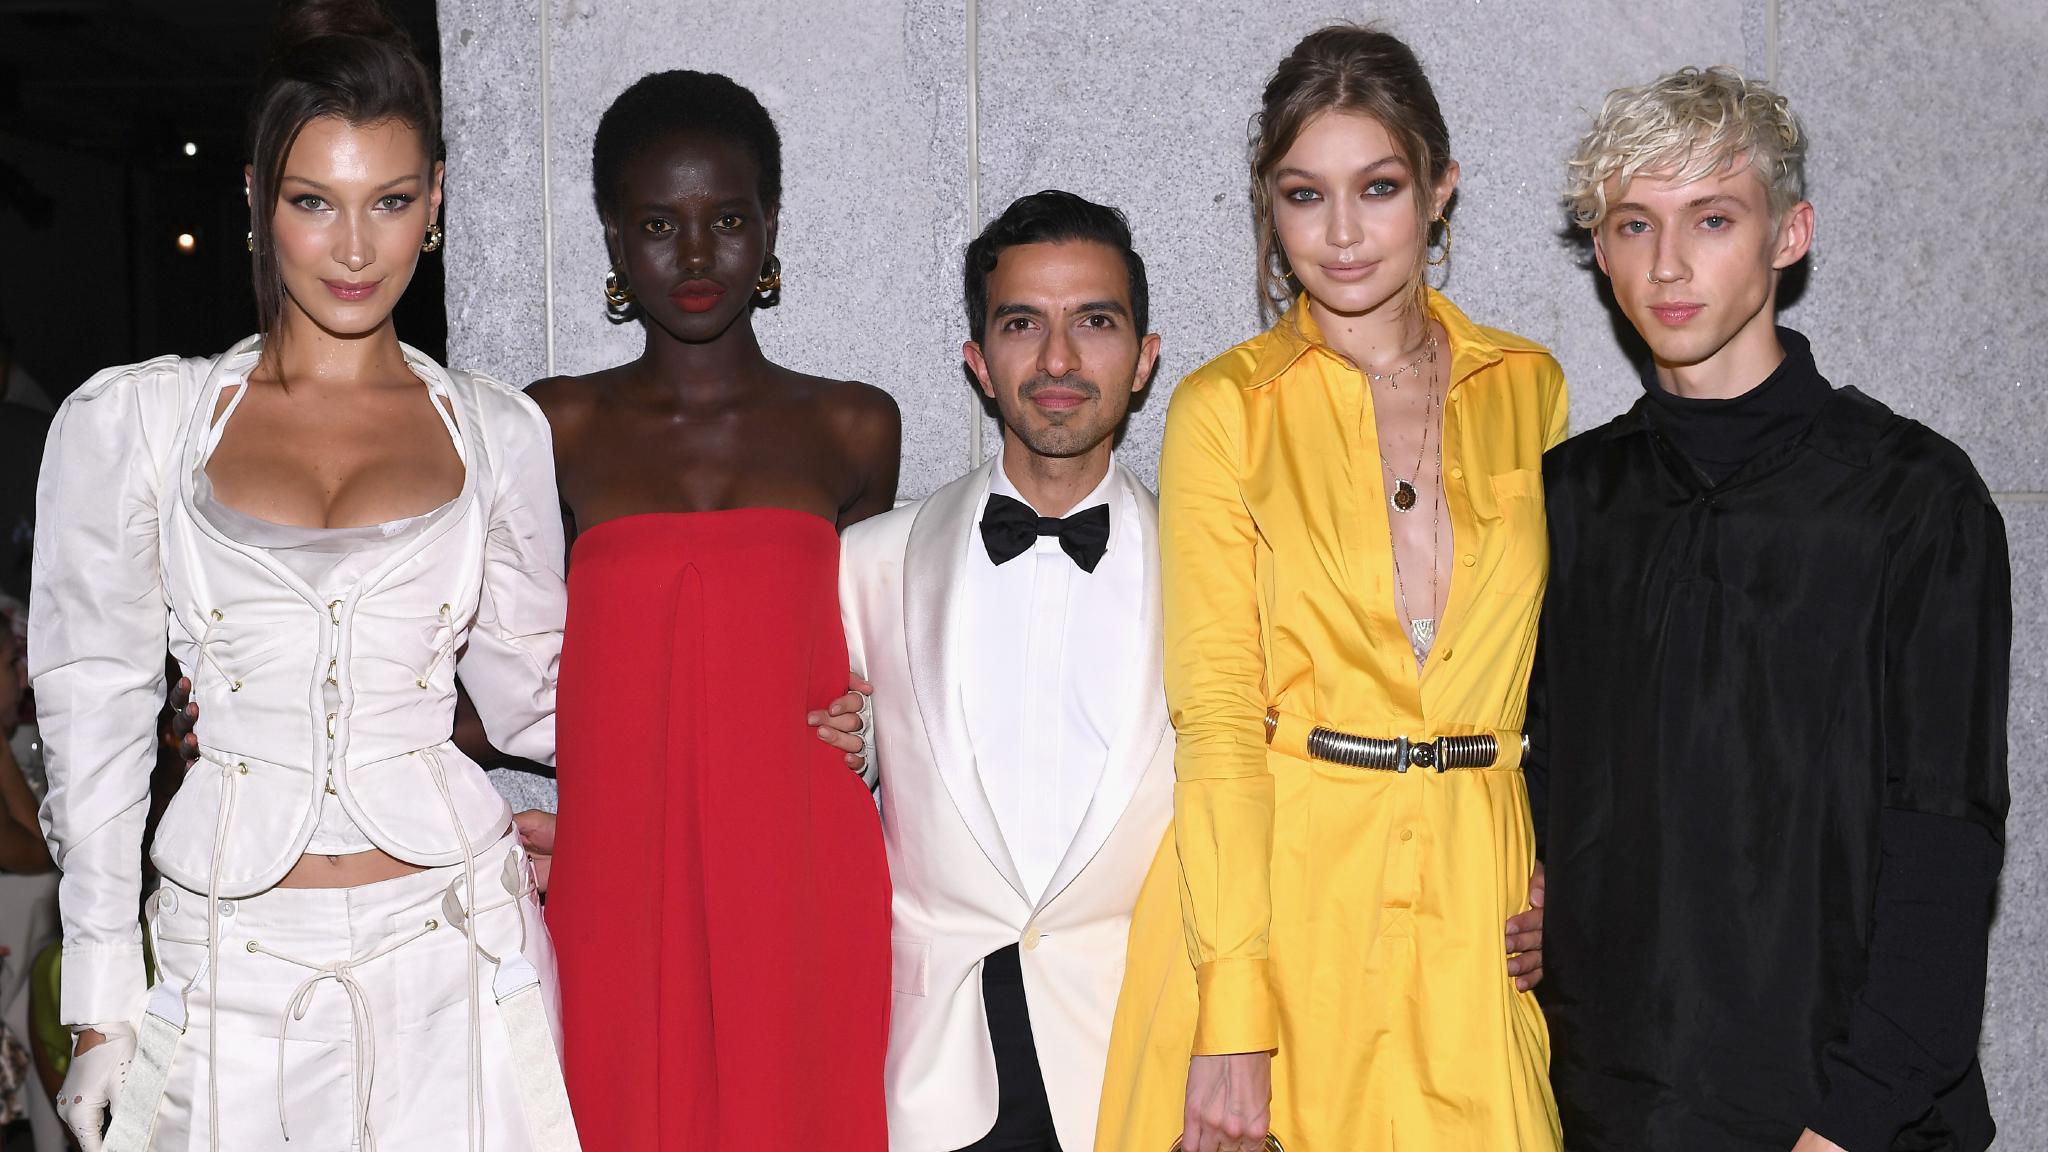 Adelaide supermodel Adut Akech named among global fashion's 500 most